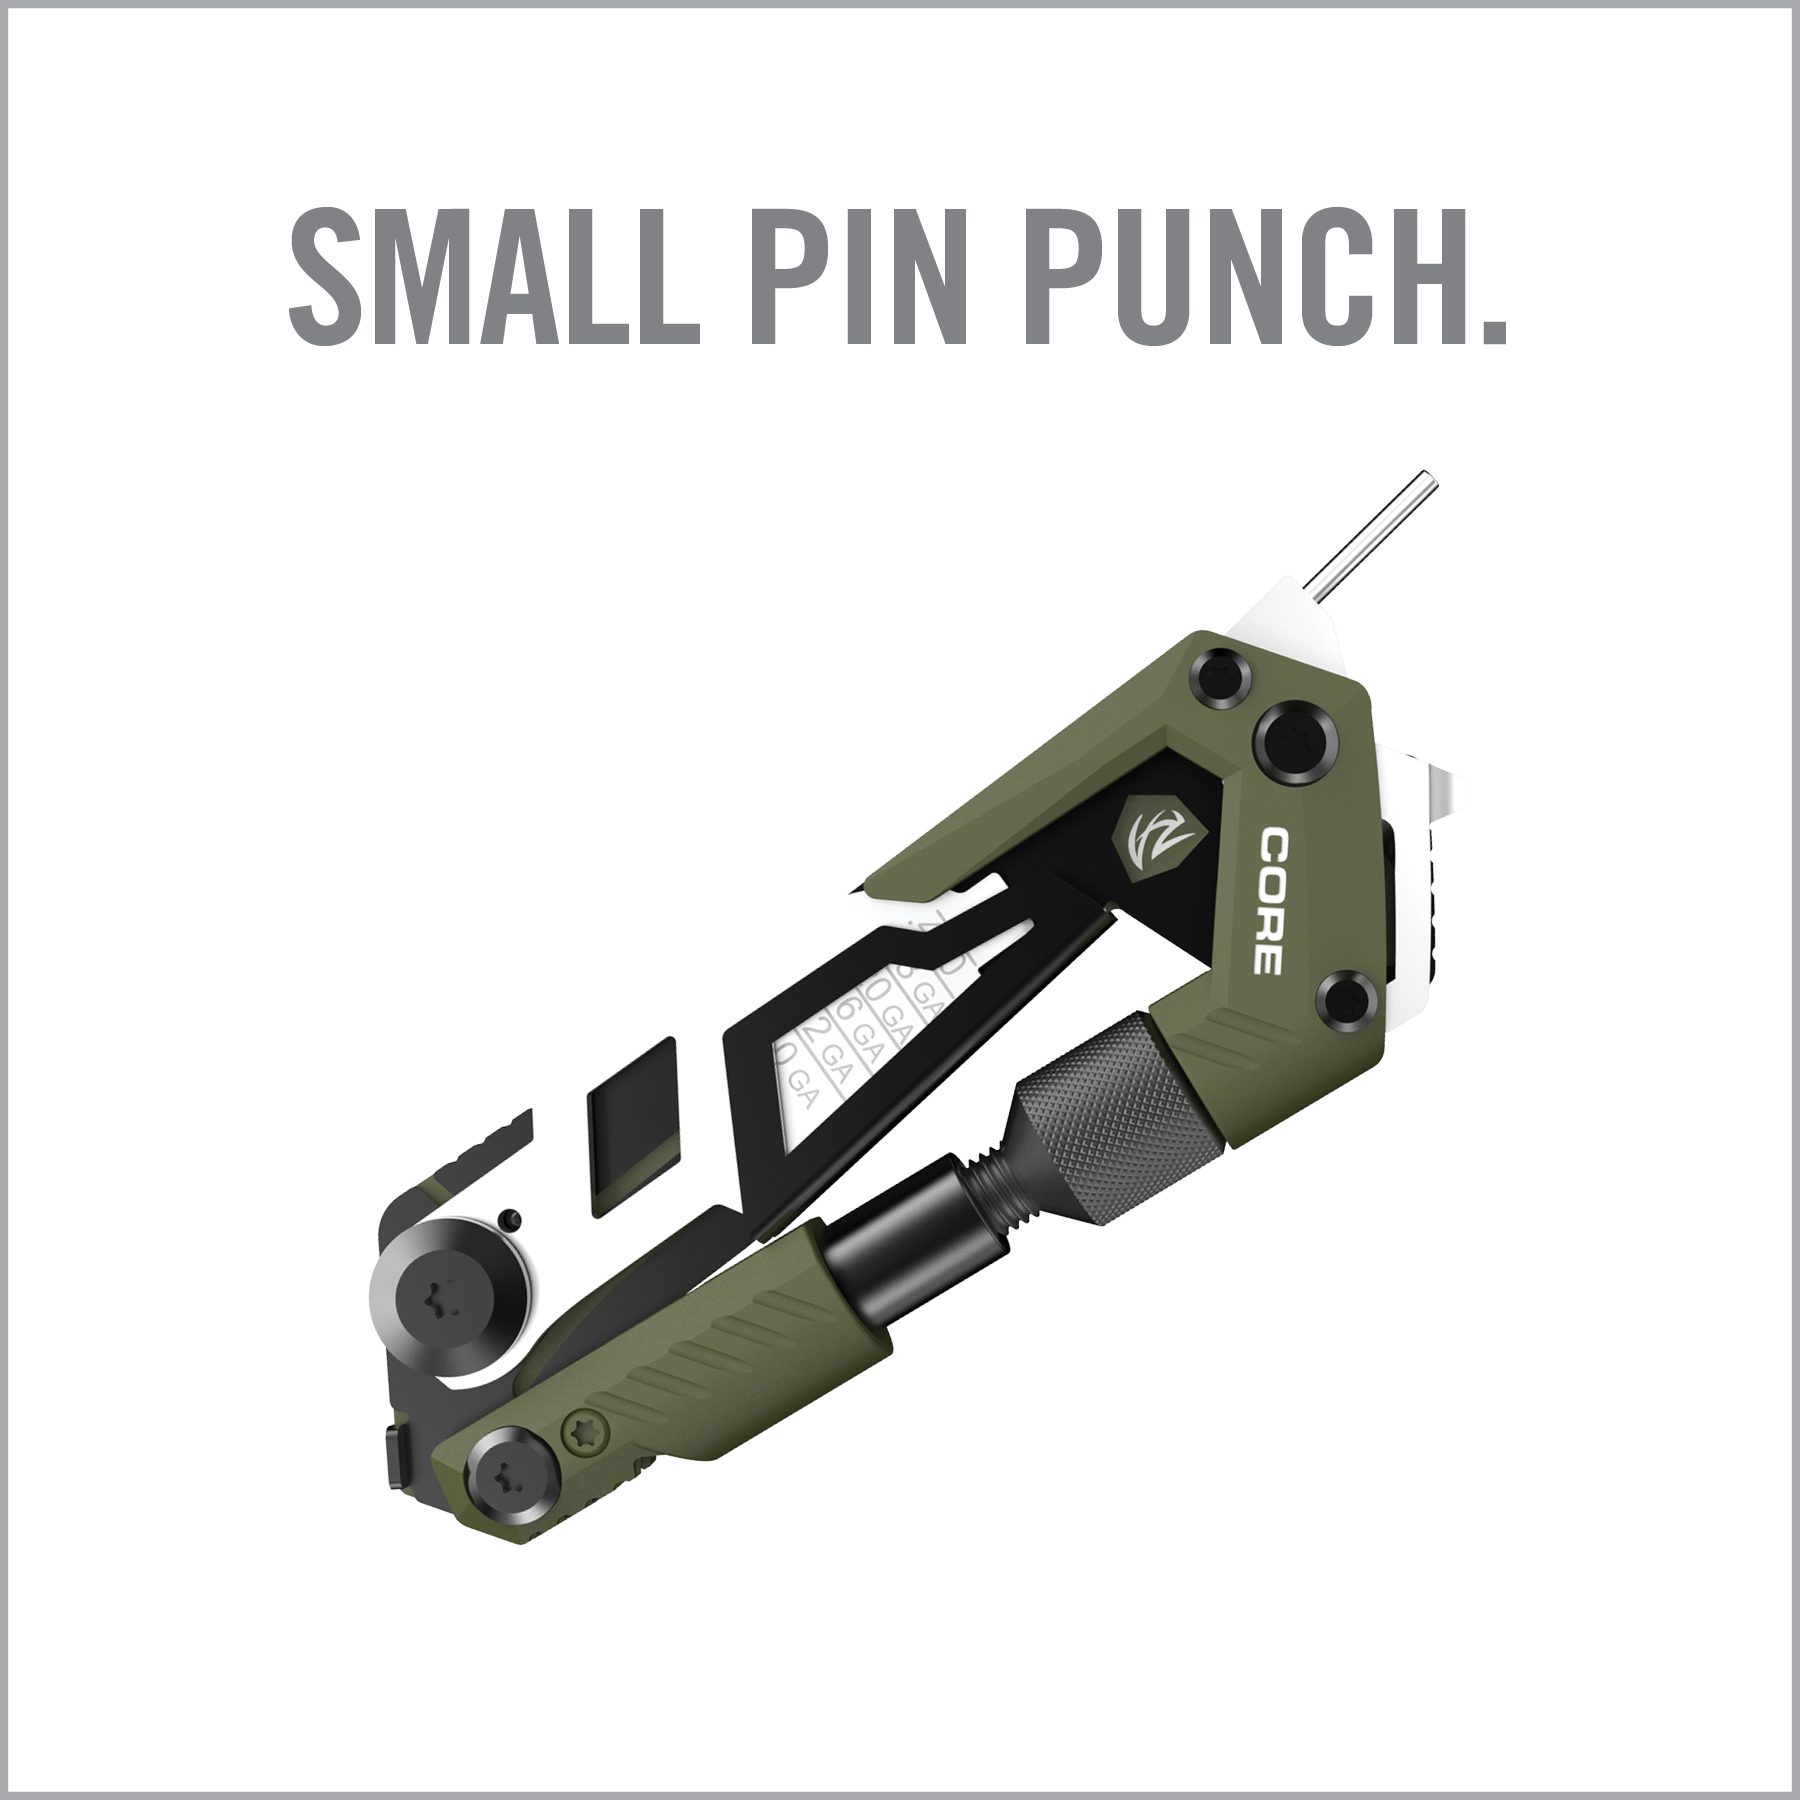 the small punch is attached to a larger tool